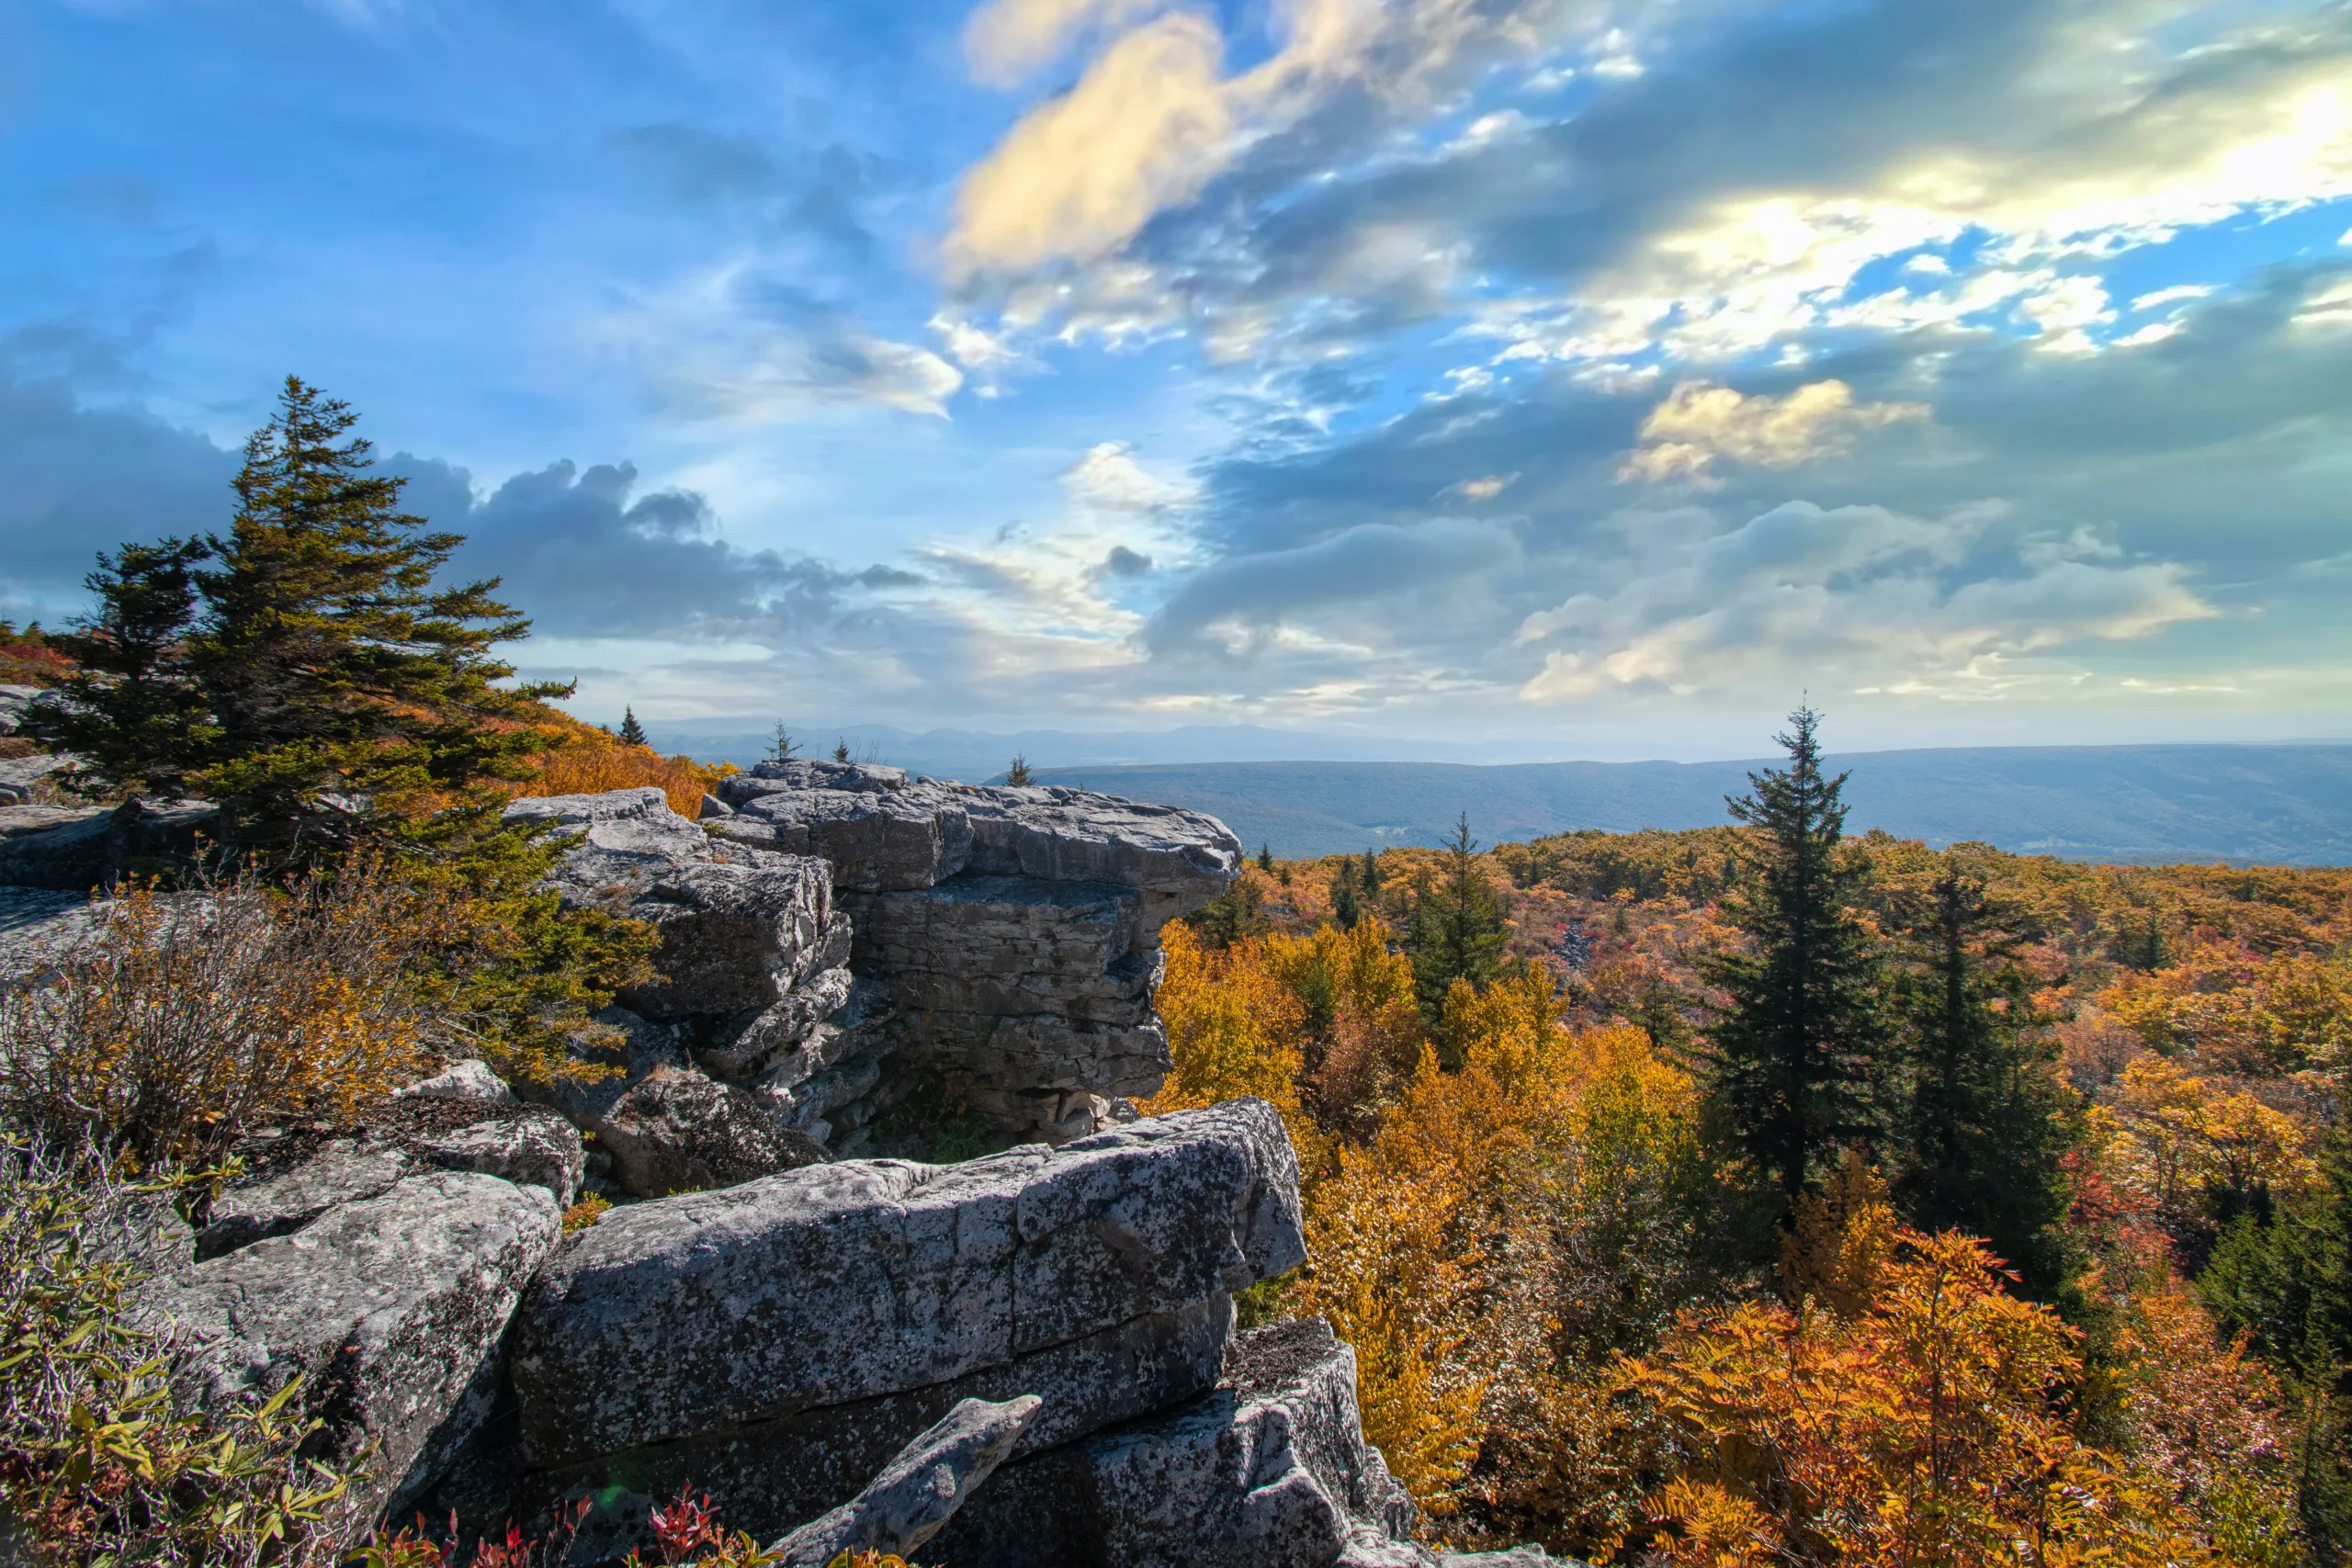 The 17,371 acre Dolly Sods Wilderness in the Monongahela National Forest is part of the National Wilderness Preservation System. It is located in West Virginia. The Dolly Sods Wilderness contains bog and heath eco-types, more commonly typical to southern Canada. Elevations range from 2,500 to over 4,700 feet.